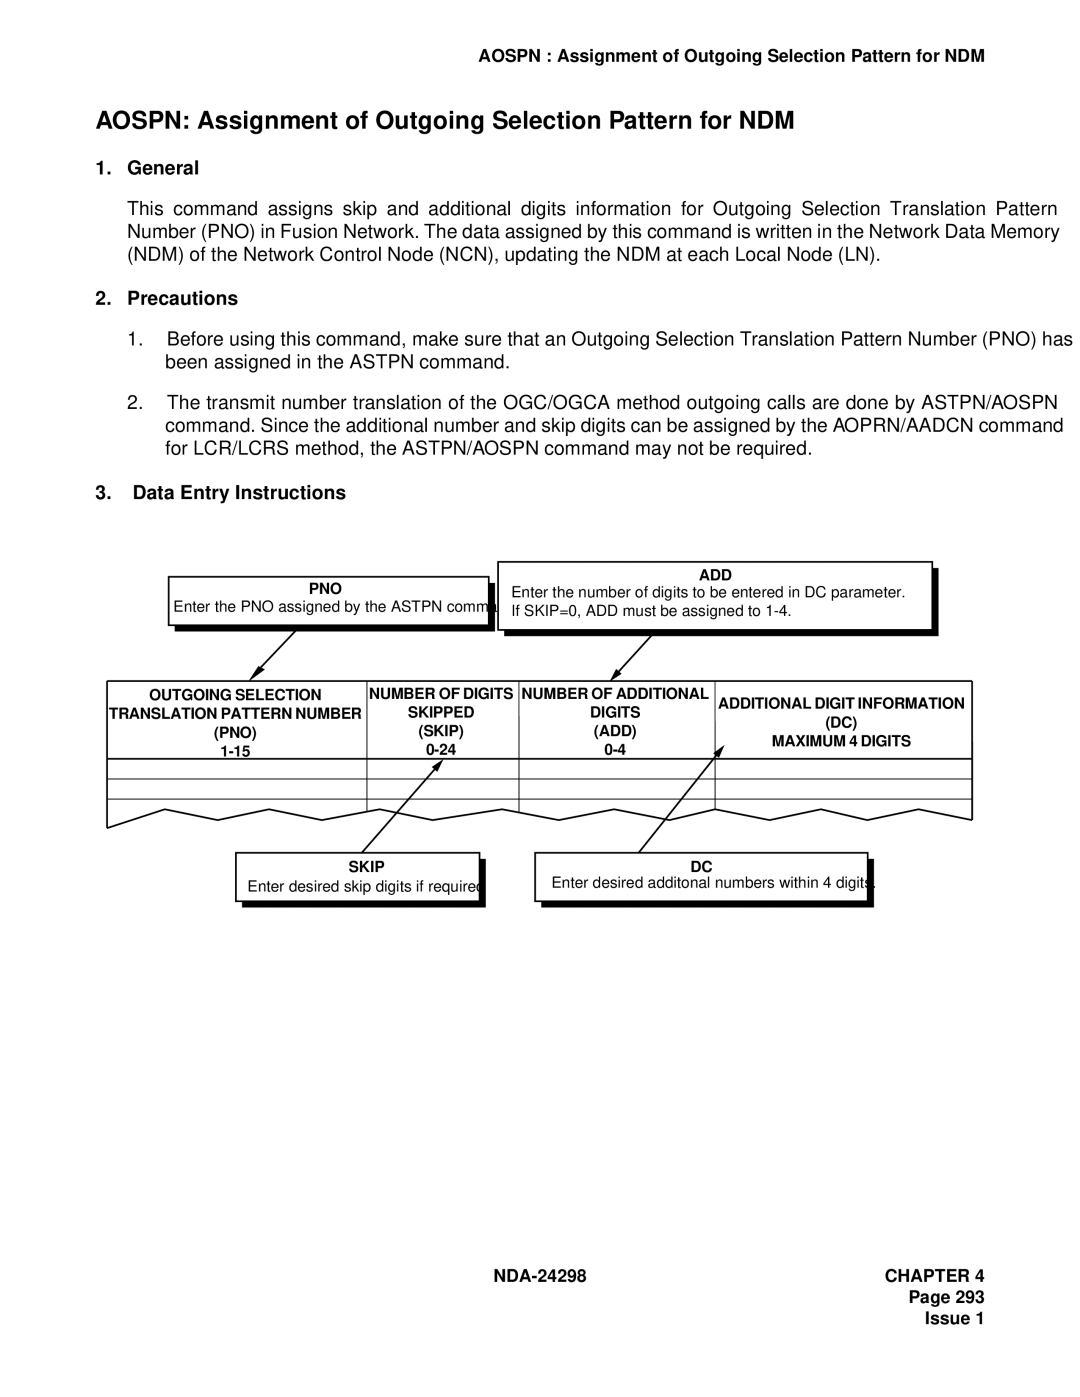 NEC NDA-24298 manual Aospn Assignment of Outgoing Selection Pattern for NDM 